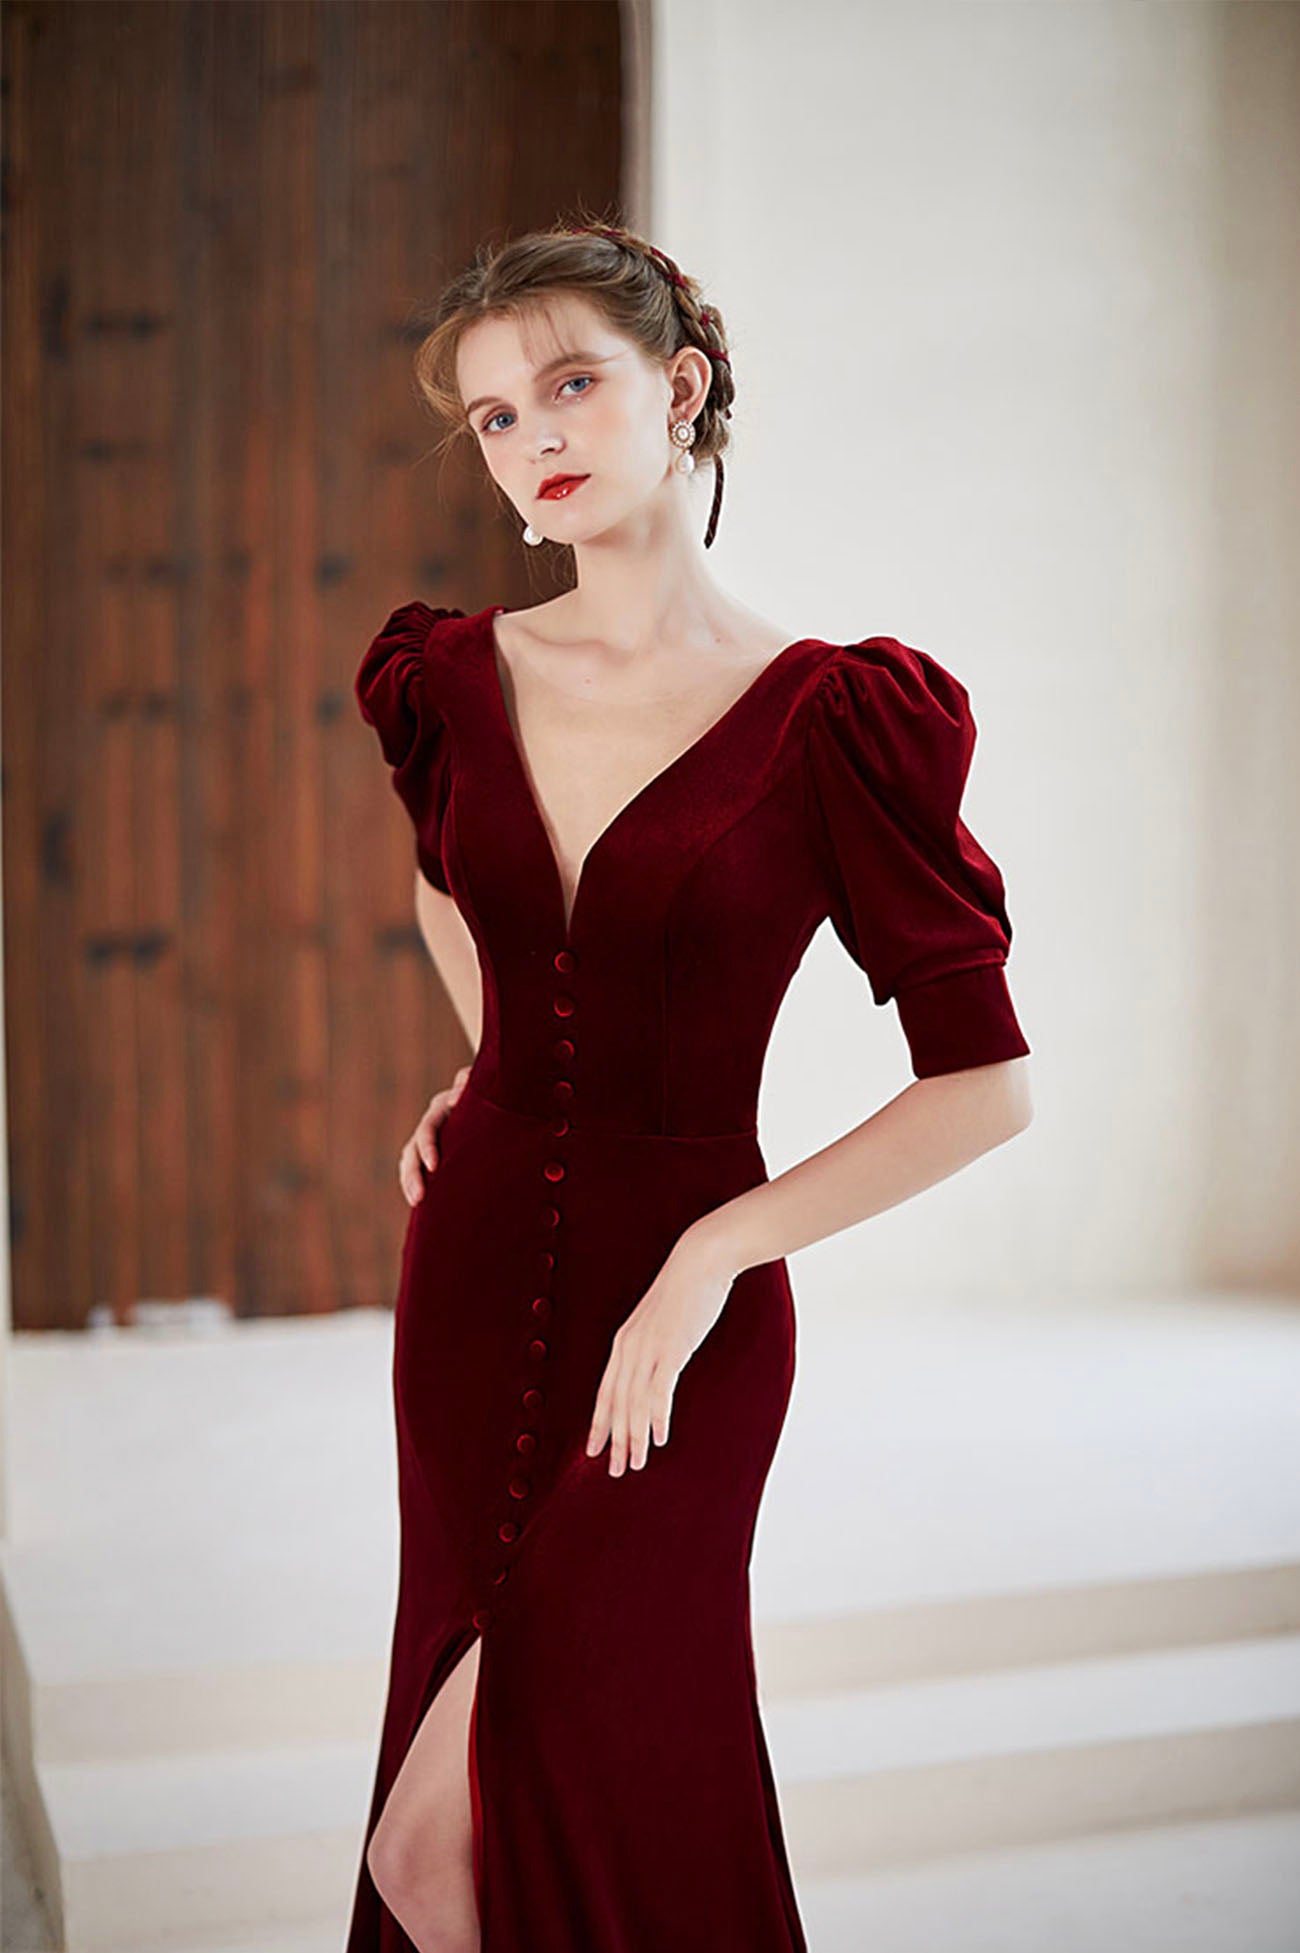 Aurora – Maroon | Long gown design, Gown party wear, Long gown dress